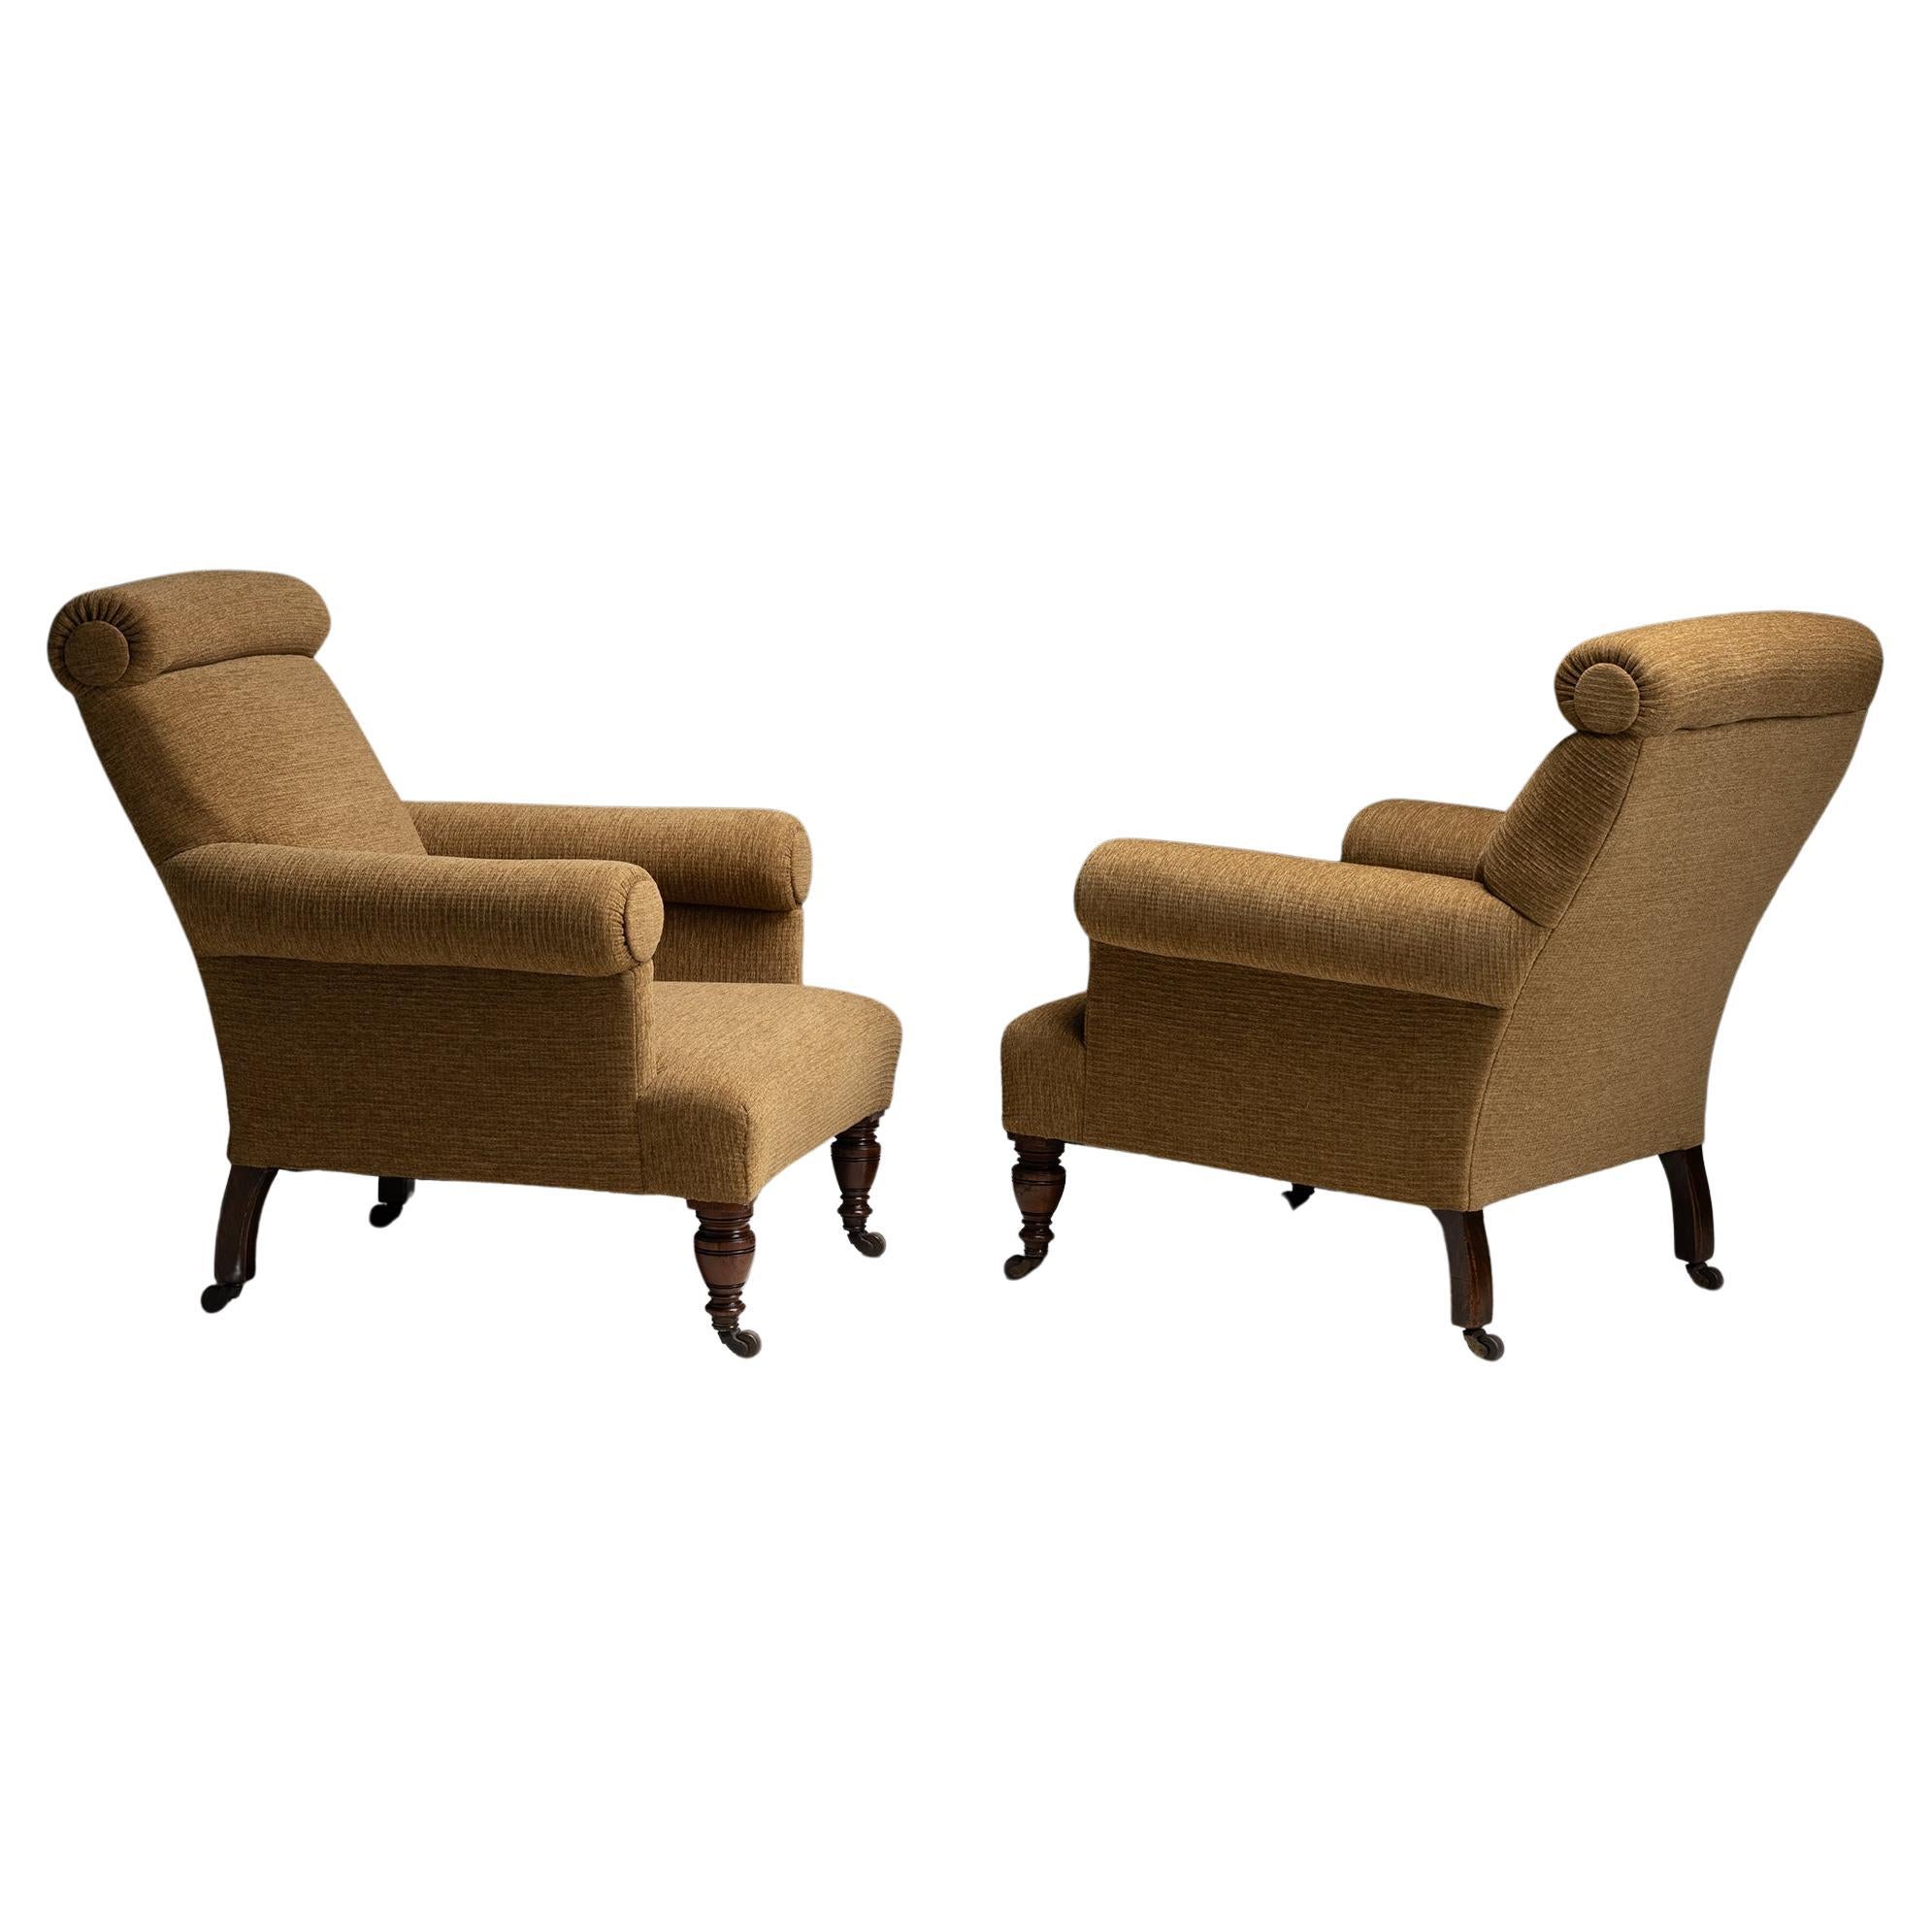 Victorian Armchairs in Pierre Frey Chenille Circa 1890 For Sale